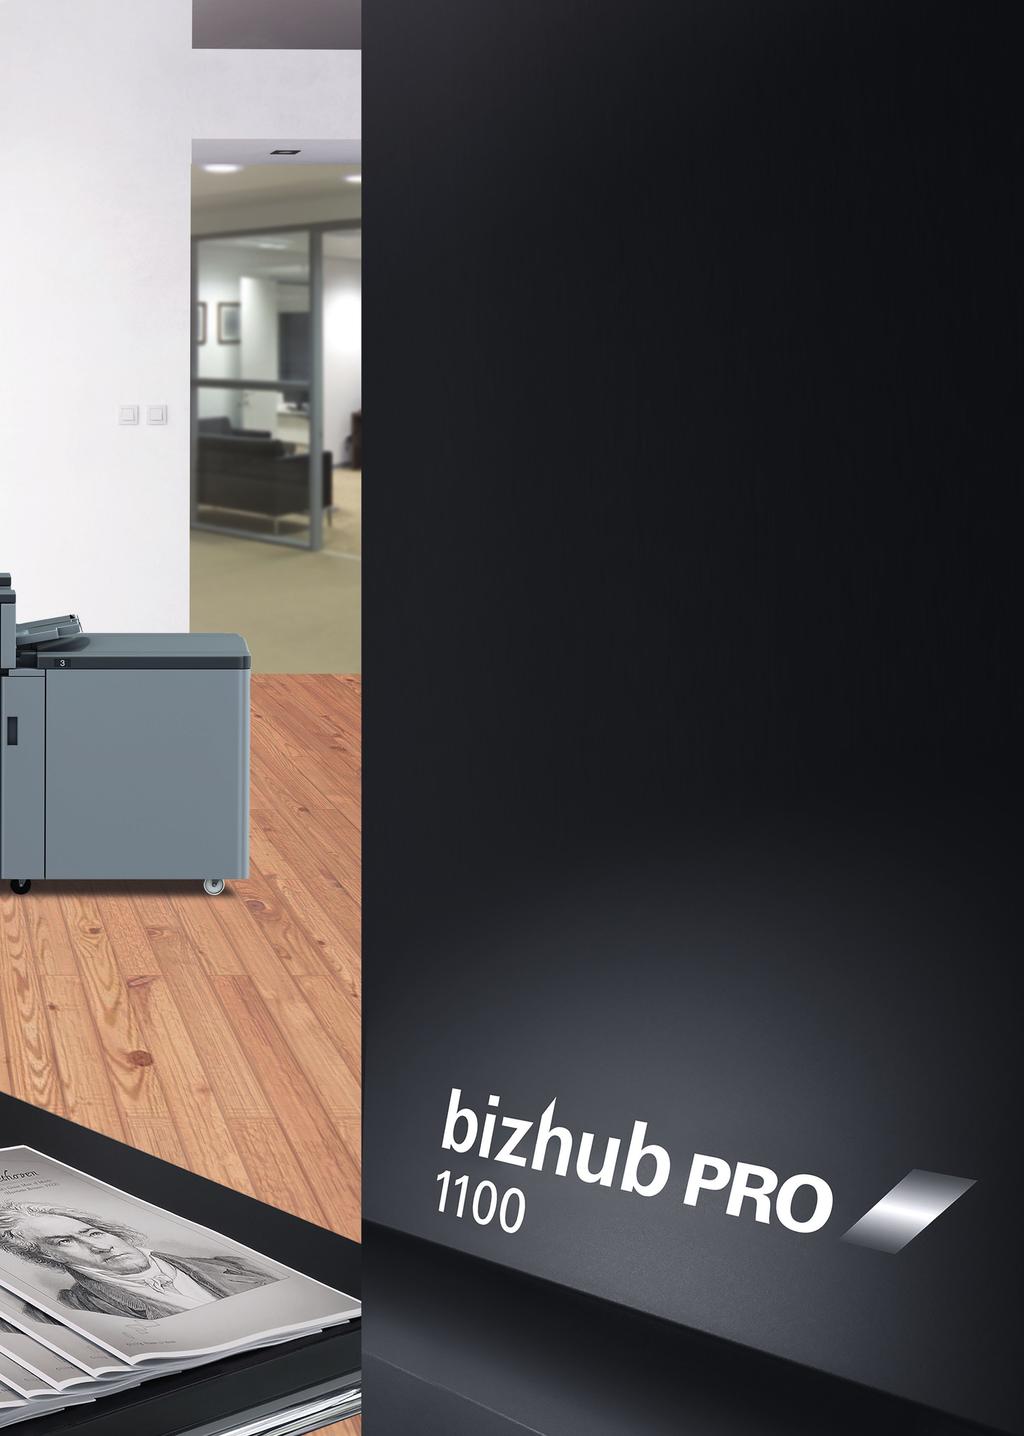 Productivity and operability support a variety of demands, from in-house printing to professional printing services bizhub PRO 1100 possesses the reliability and high precision required of on-demand